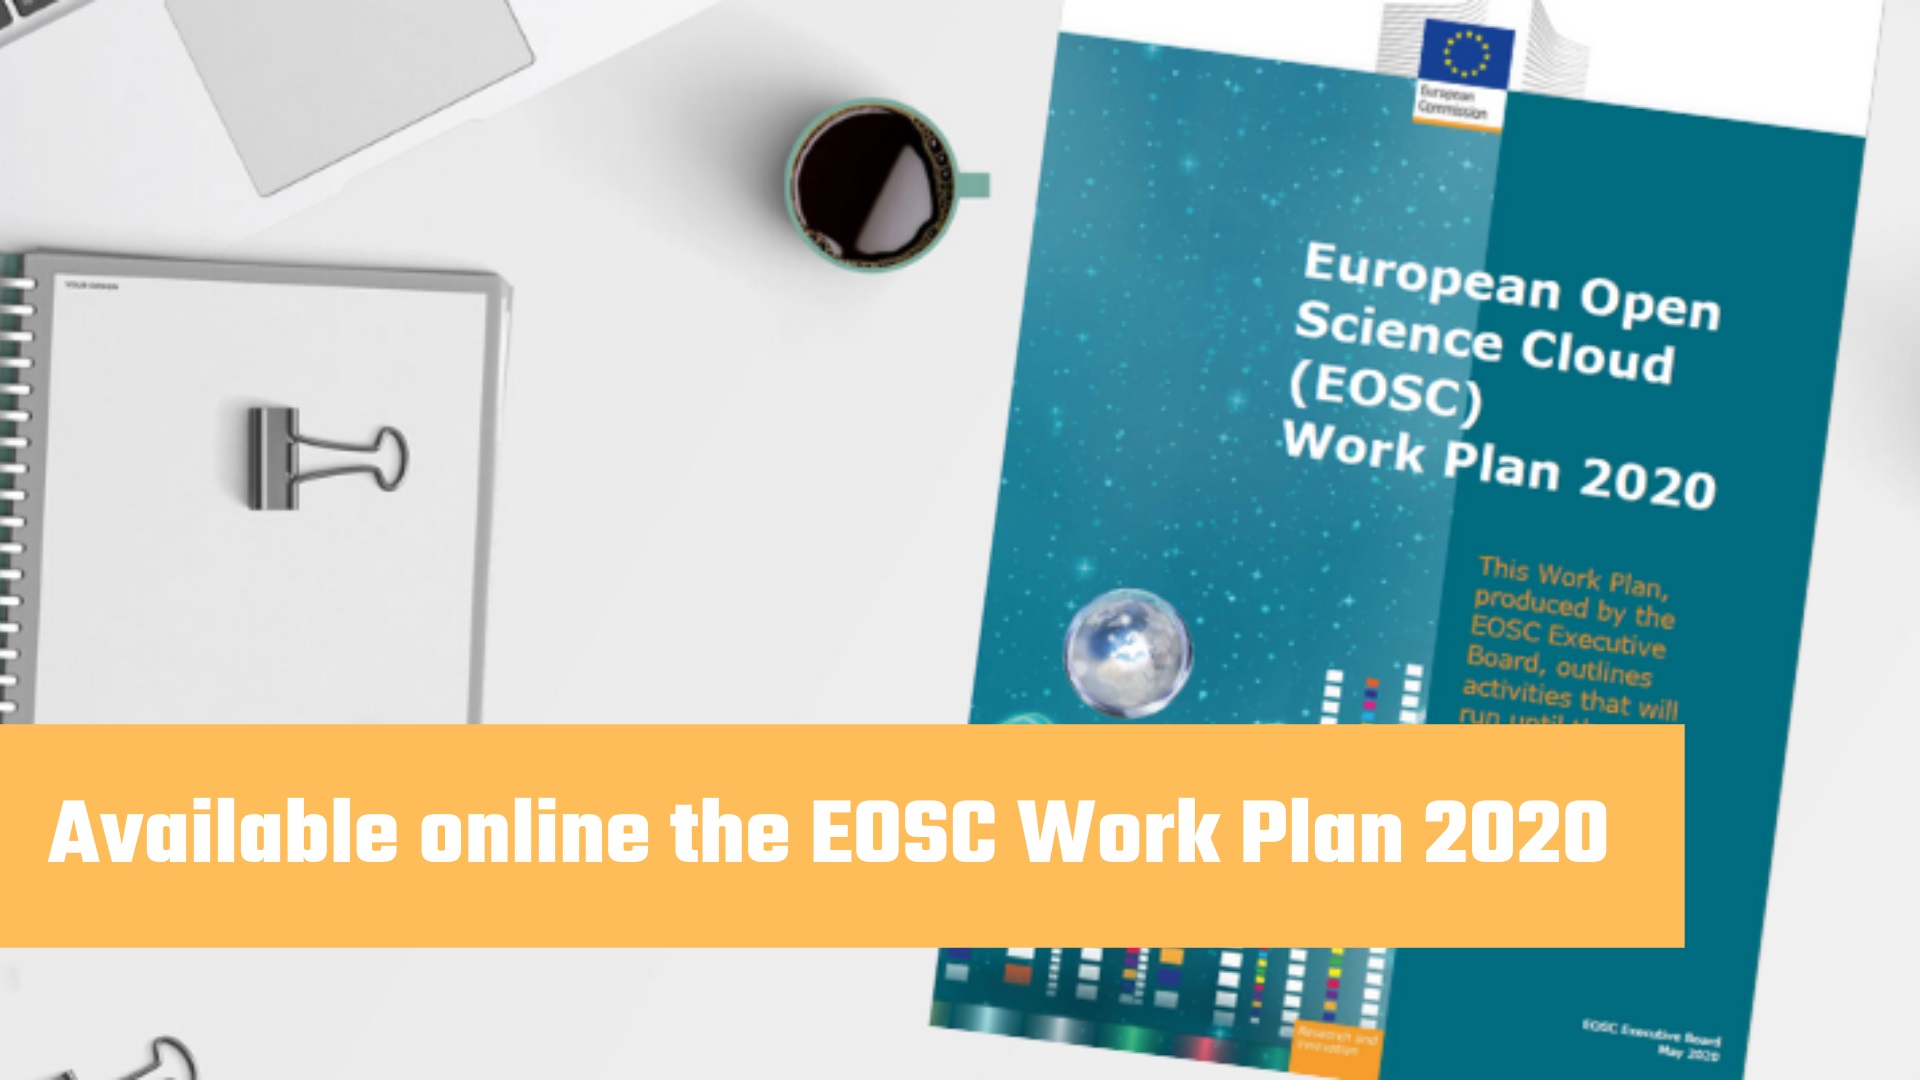 Available online the EOSC Work Plan 2020c